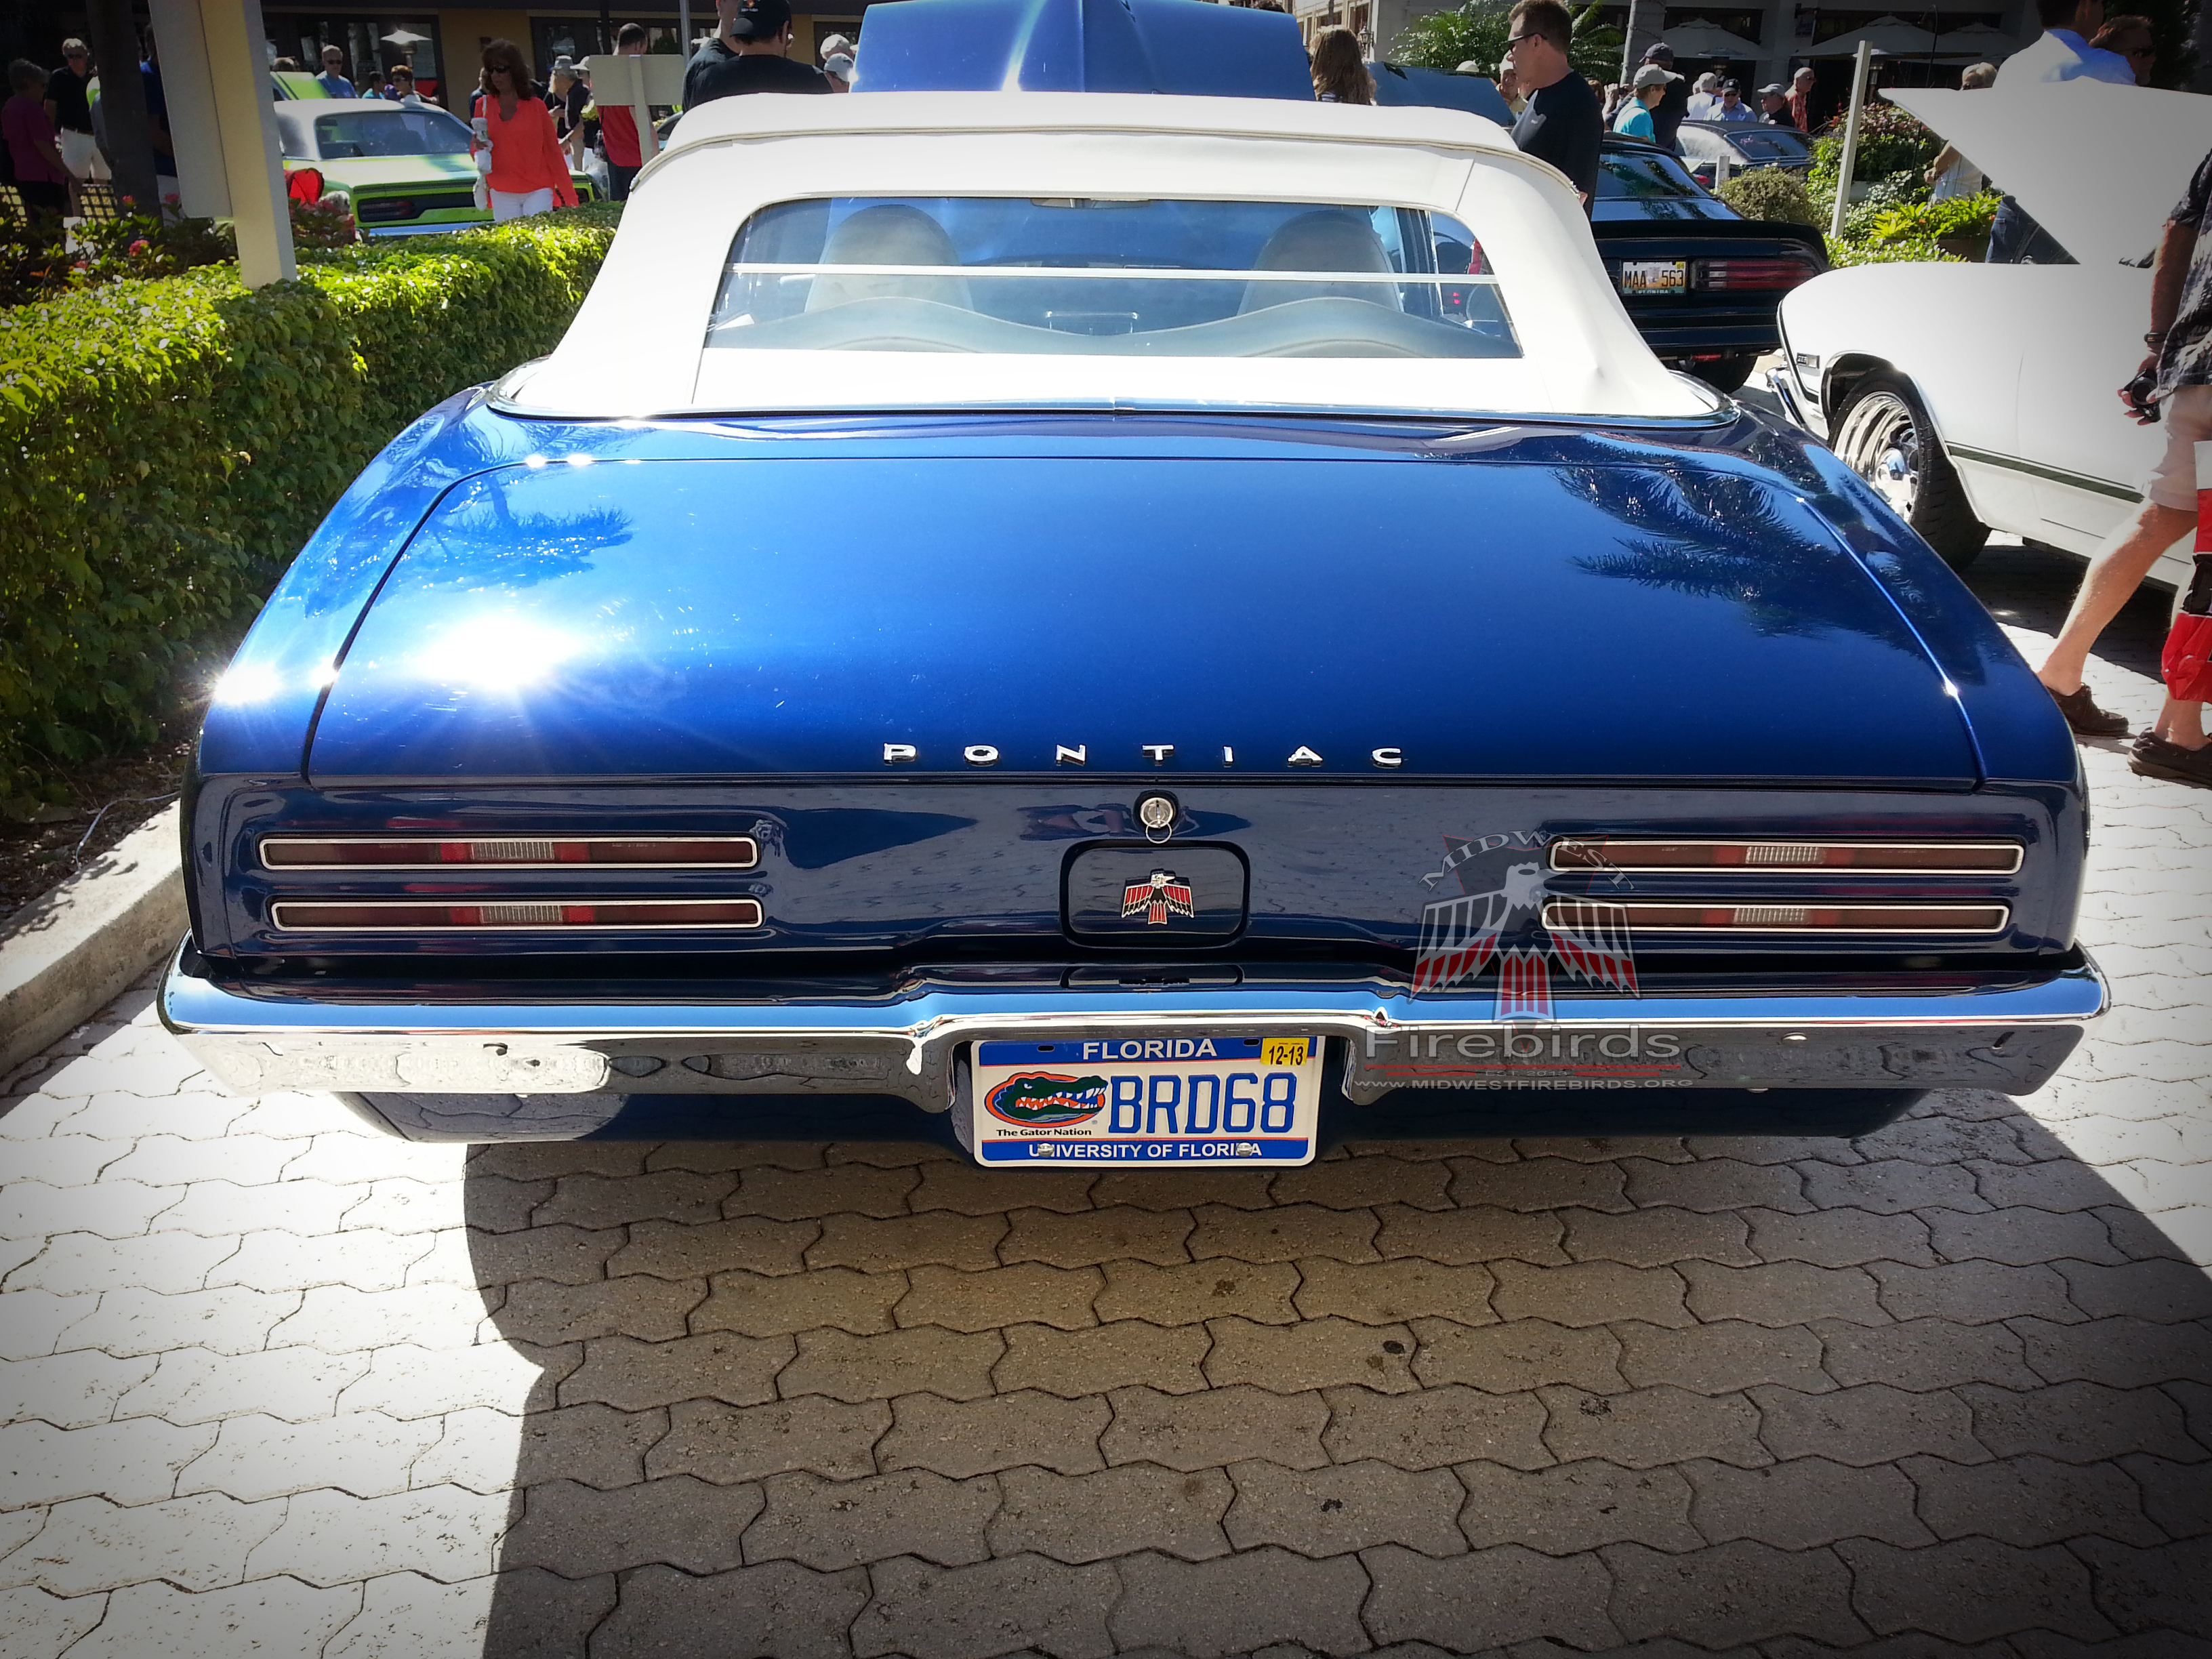 First-generation Pontiac Firebirds on display at the Cars on 5th car show in Naples, Florida.